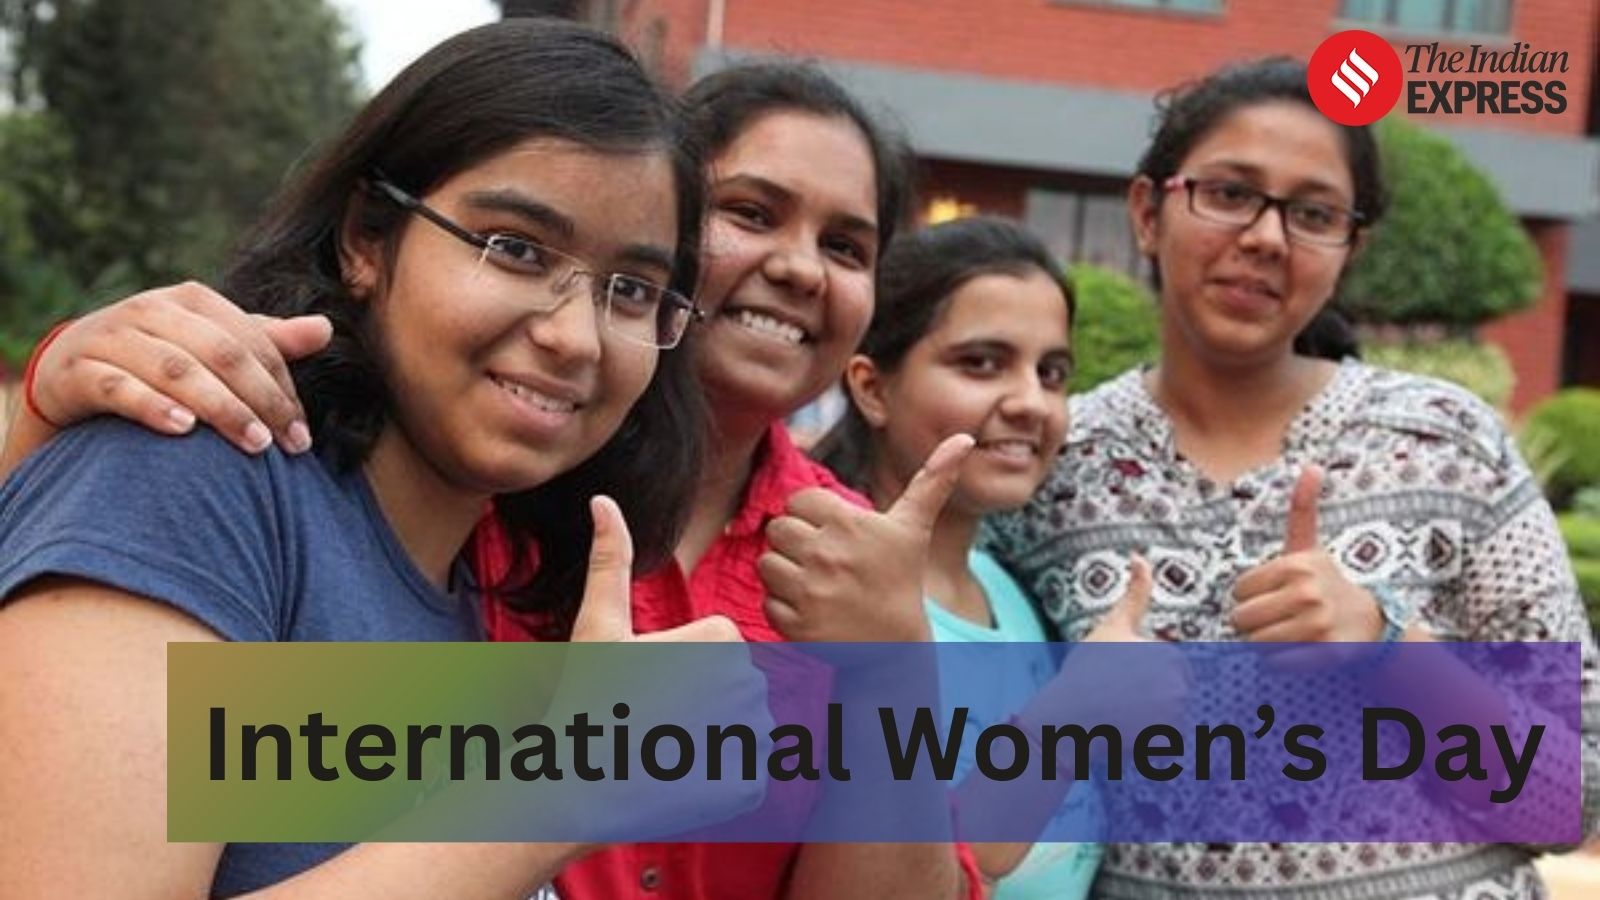 Scholarships for Girls & Women in India - Find the List